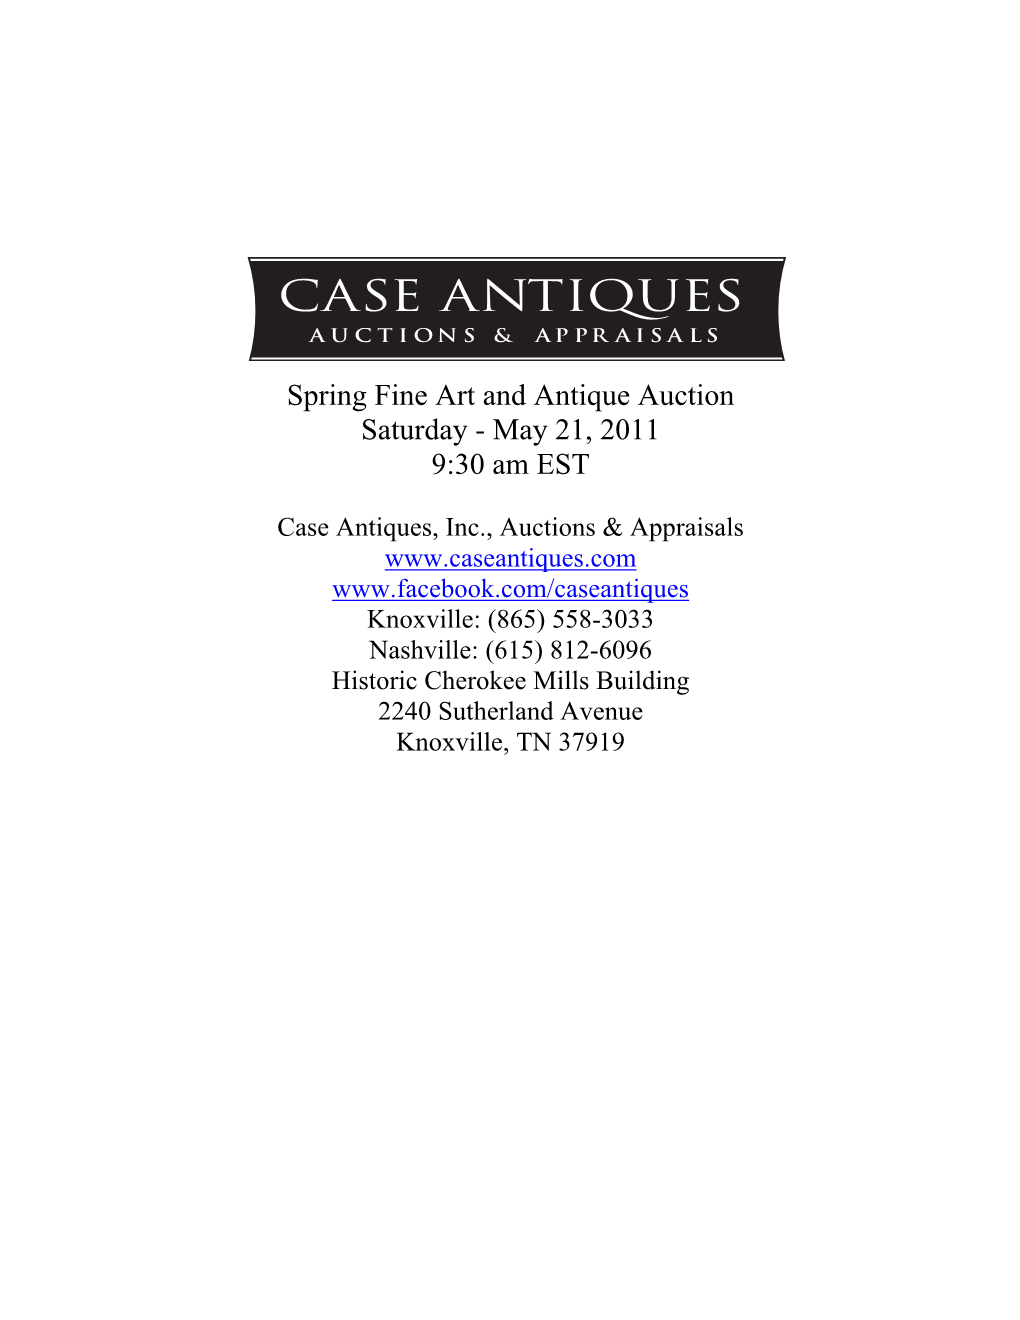 Spring Fine Art and Antique Auction Saturday - May 21, 2011 9:30 Am EST